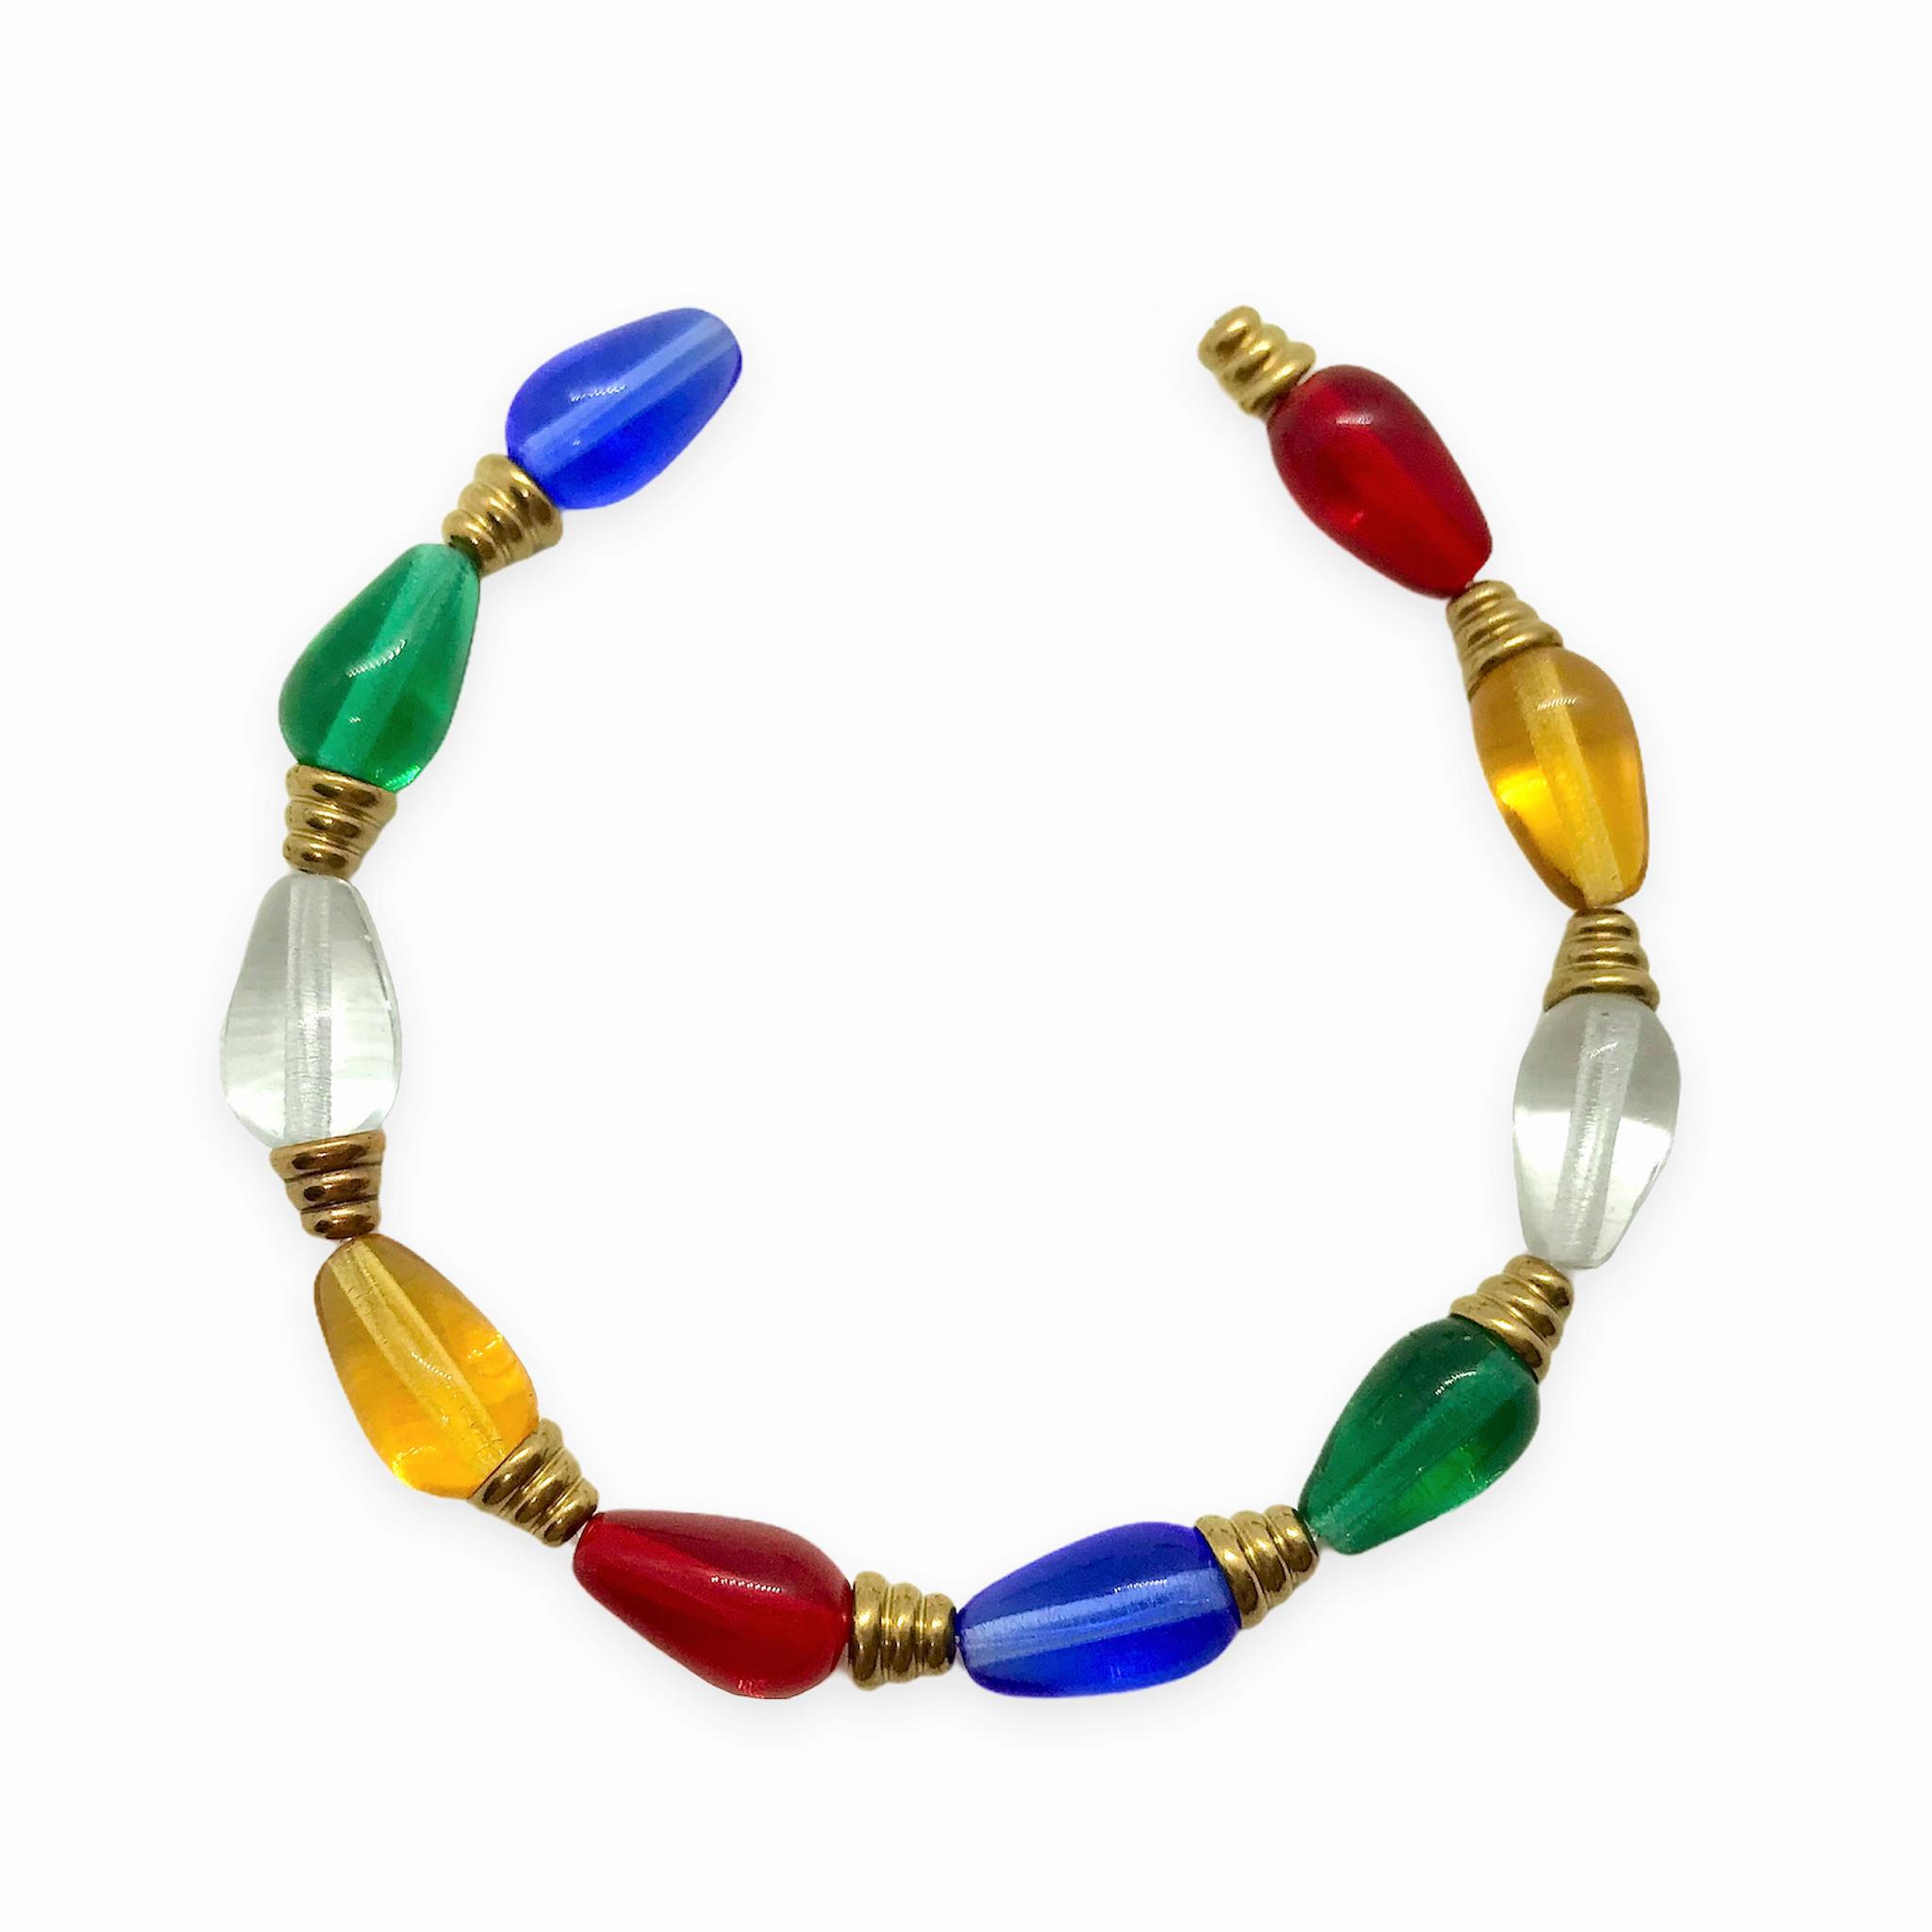 SUNLIGHT REACTIVE COLORED BEADS